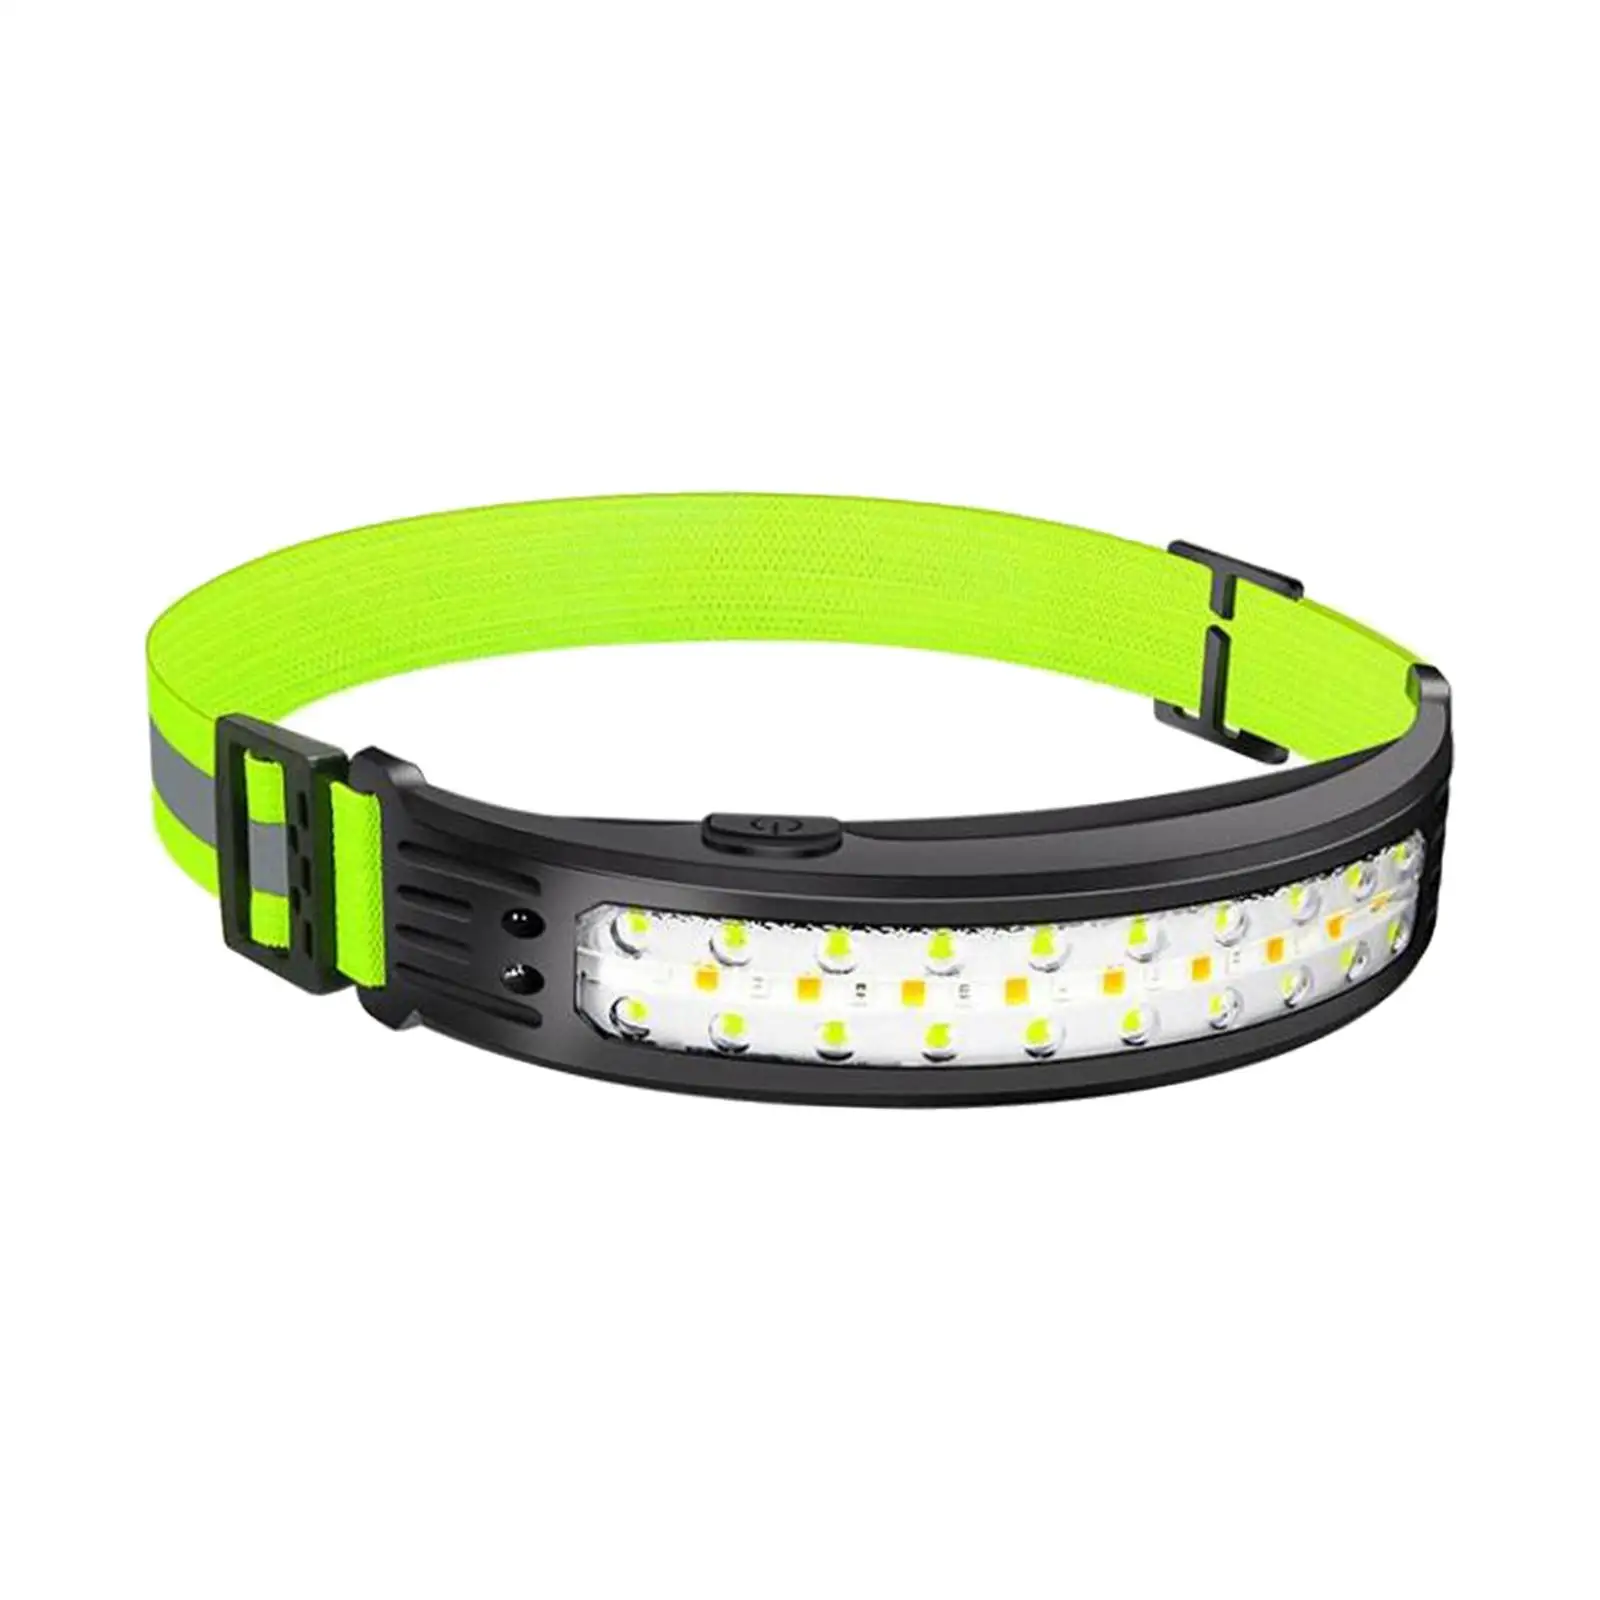 LED Headlamp Durable Portable 5 Adjustable Levels Lights COB Induction Headlamp for Car Repairing Camping Climbing Hiking Outing